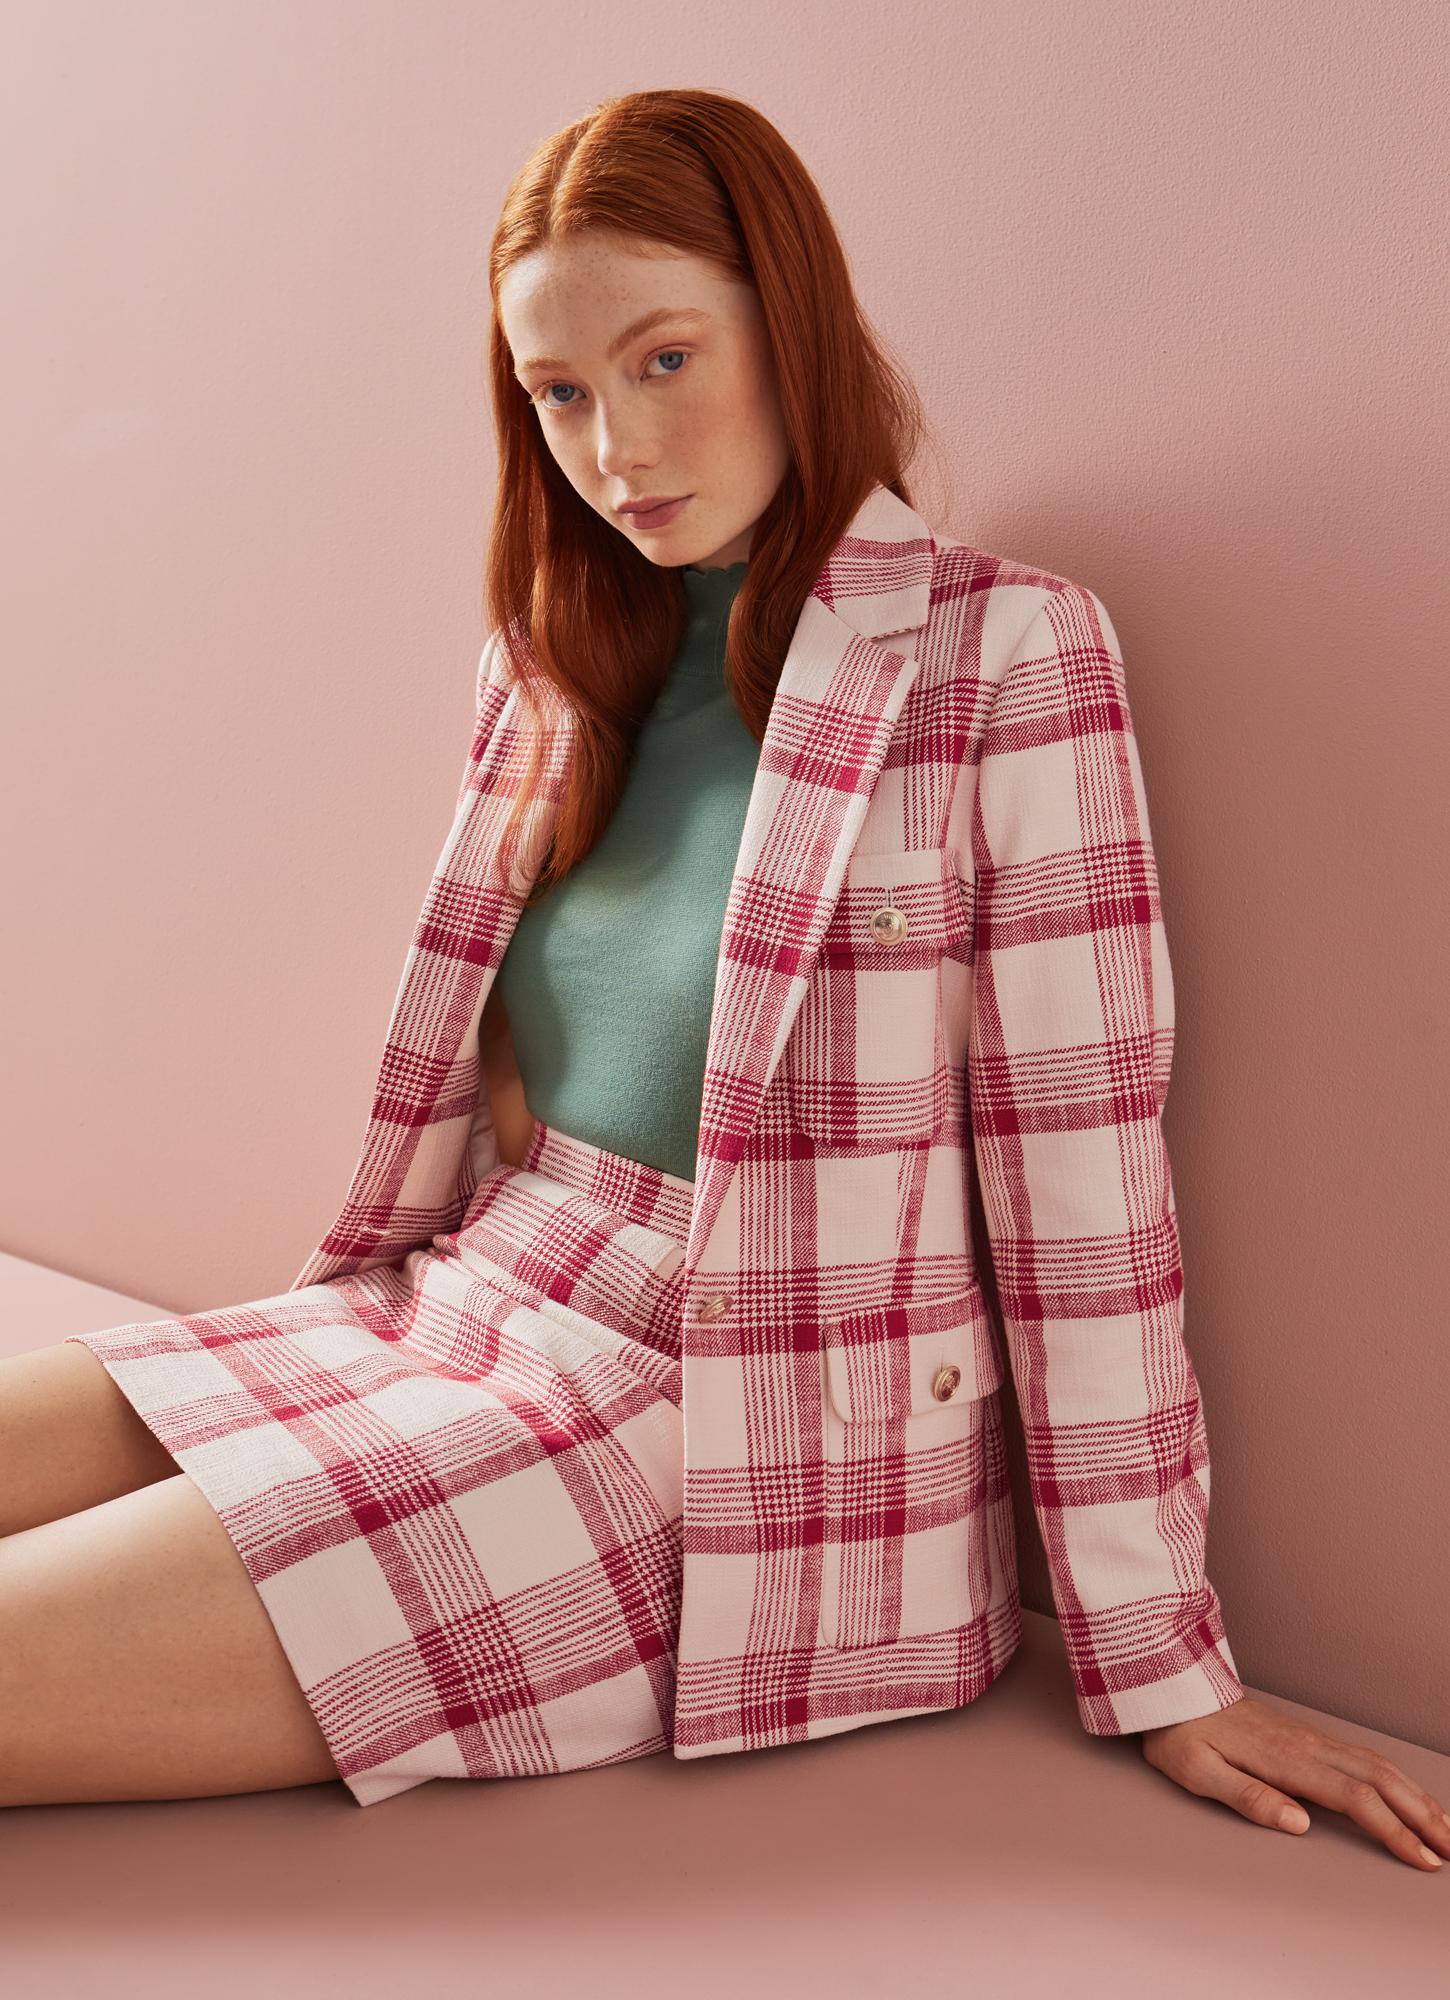 L.K.Bennett Lottie Red and Cream Check Tweed Jacket Pompeian Red Cream, Pompeian Red Cream